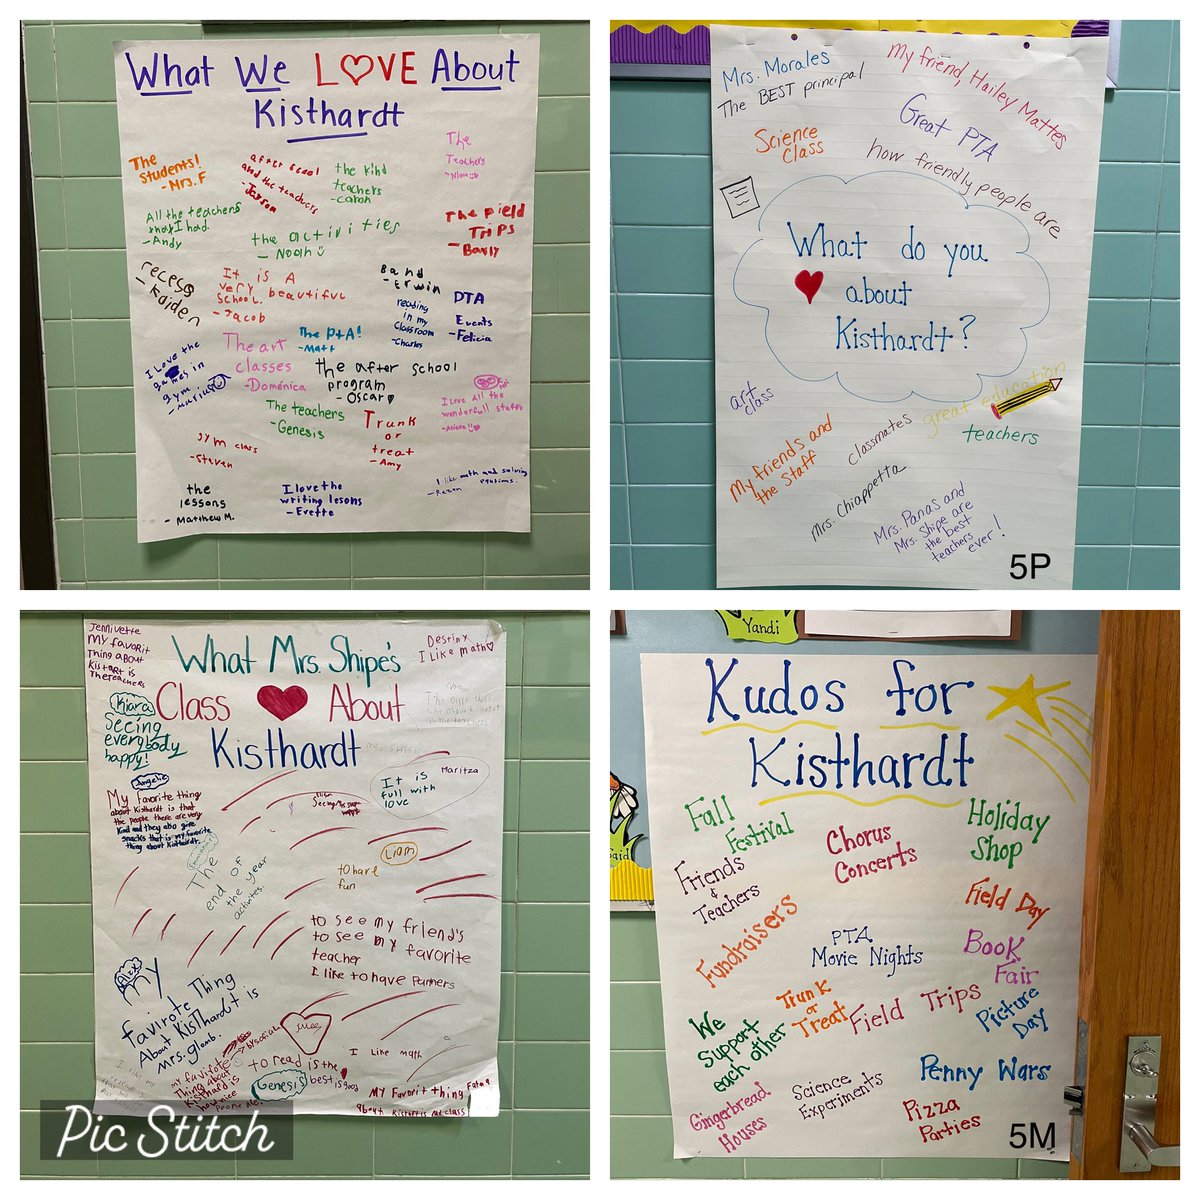 There’s so much to love about Kisthardt! Check out what our Comets say! @HTSD_Kisthardt @WeAreHTSD @ScottRRocco #AmericanEdWeek22